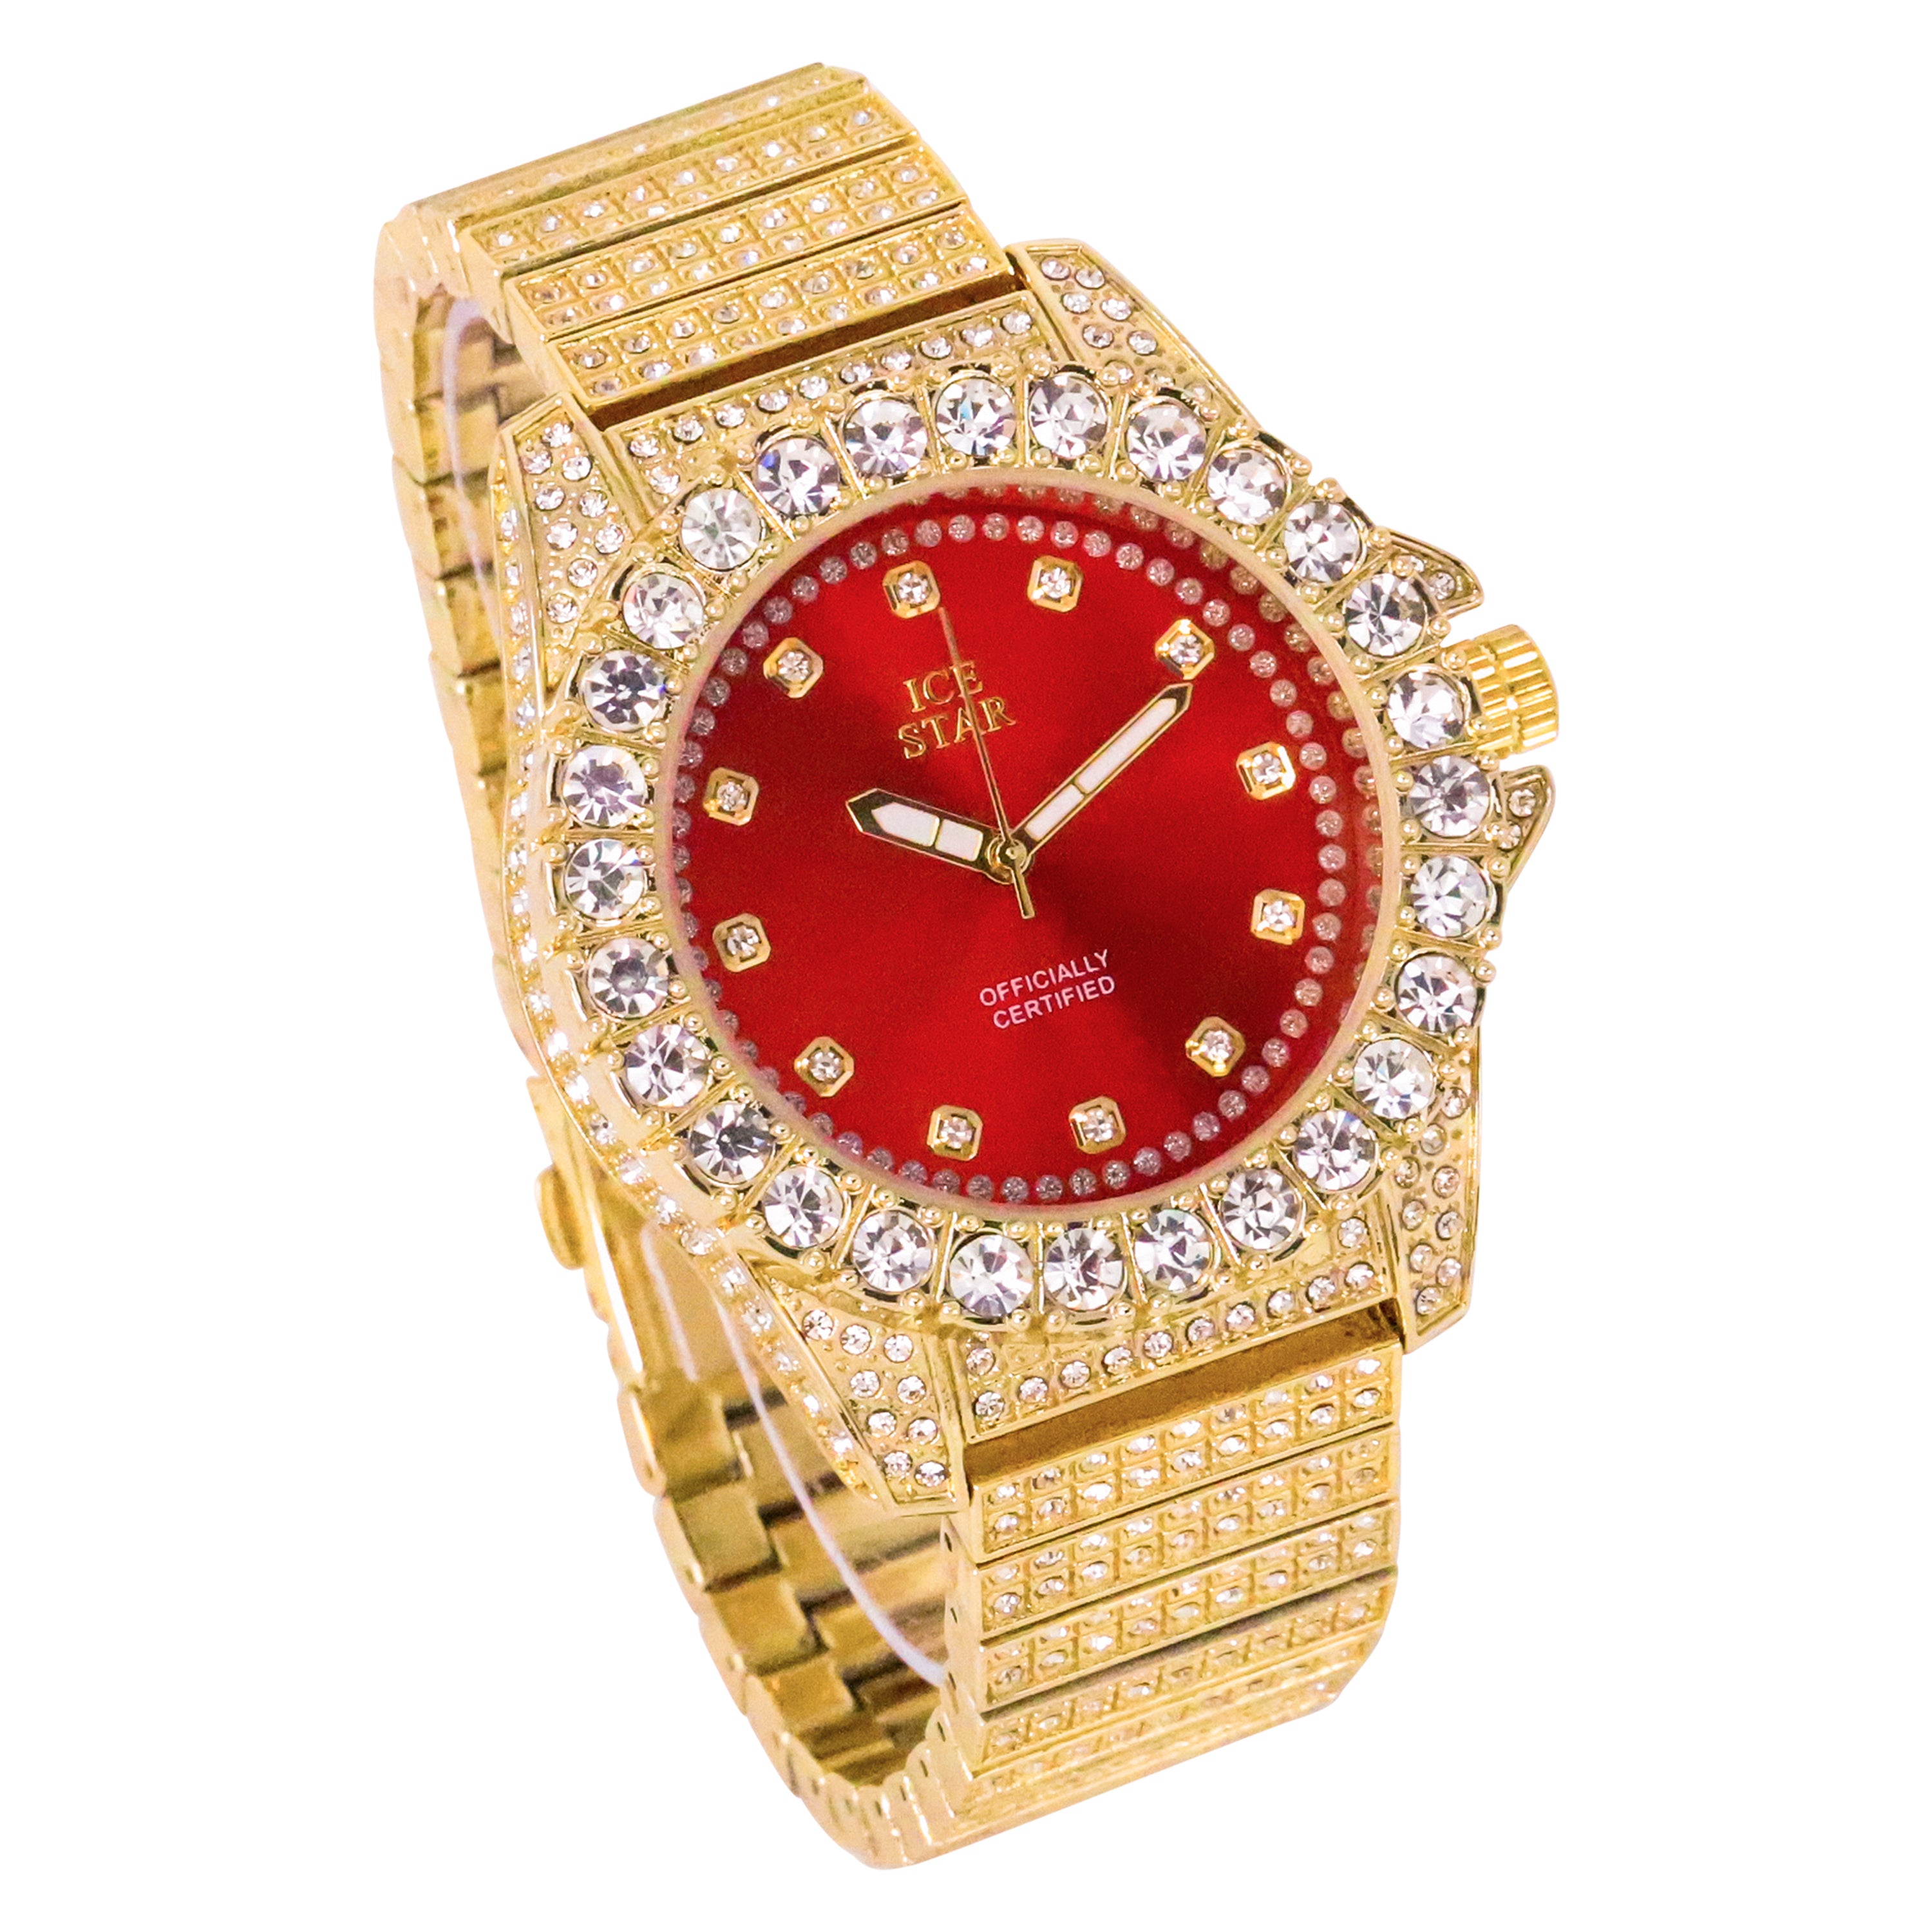 Men's Round Iced Out Watch 45mm Gold - "Fully Iced Band"